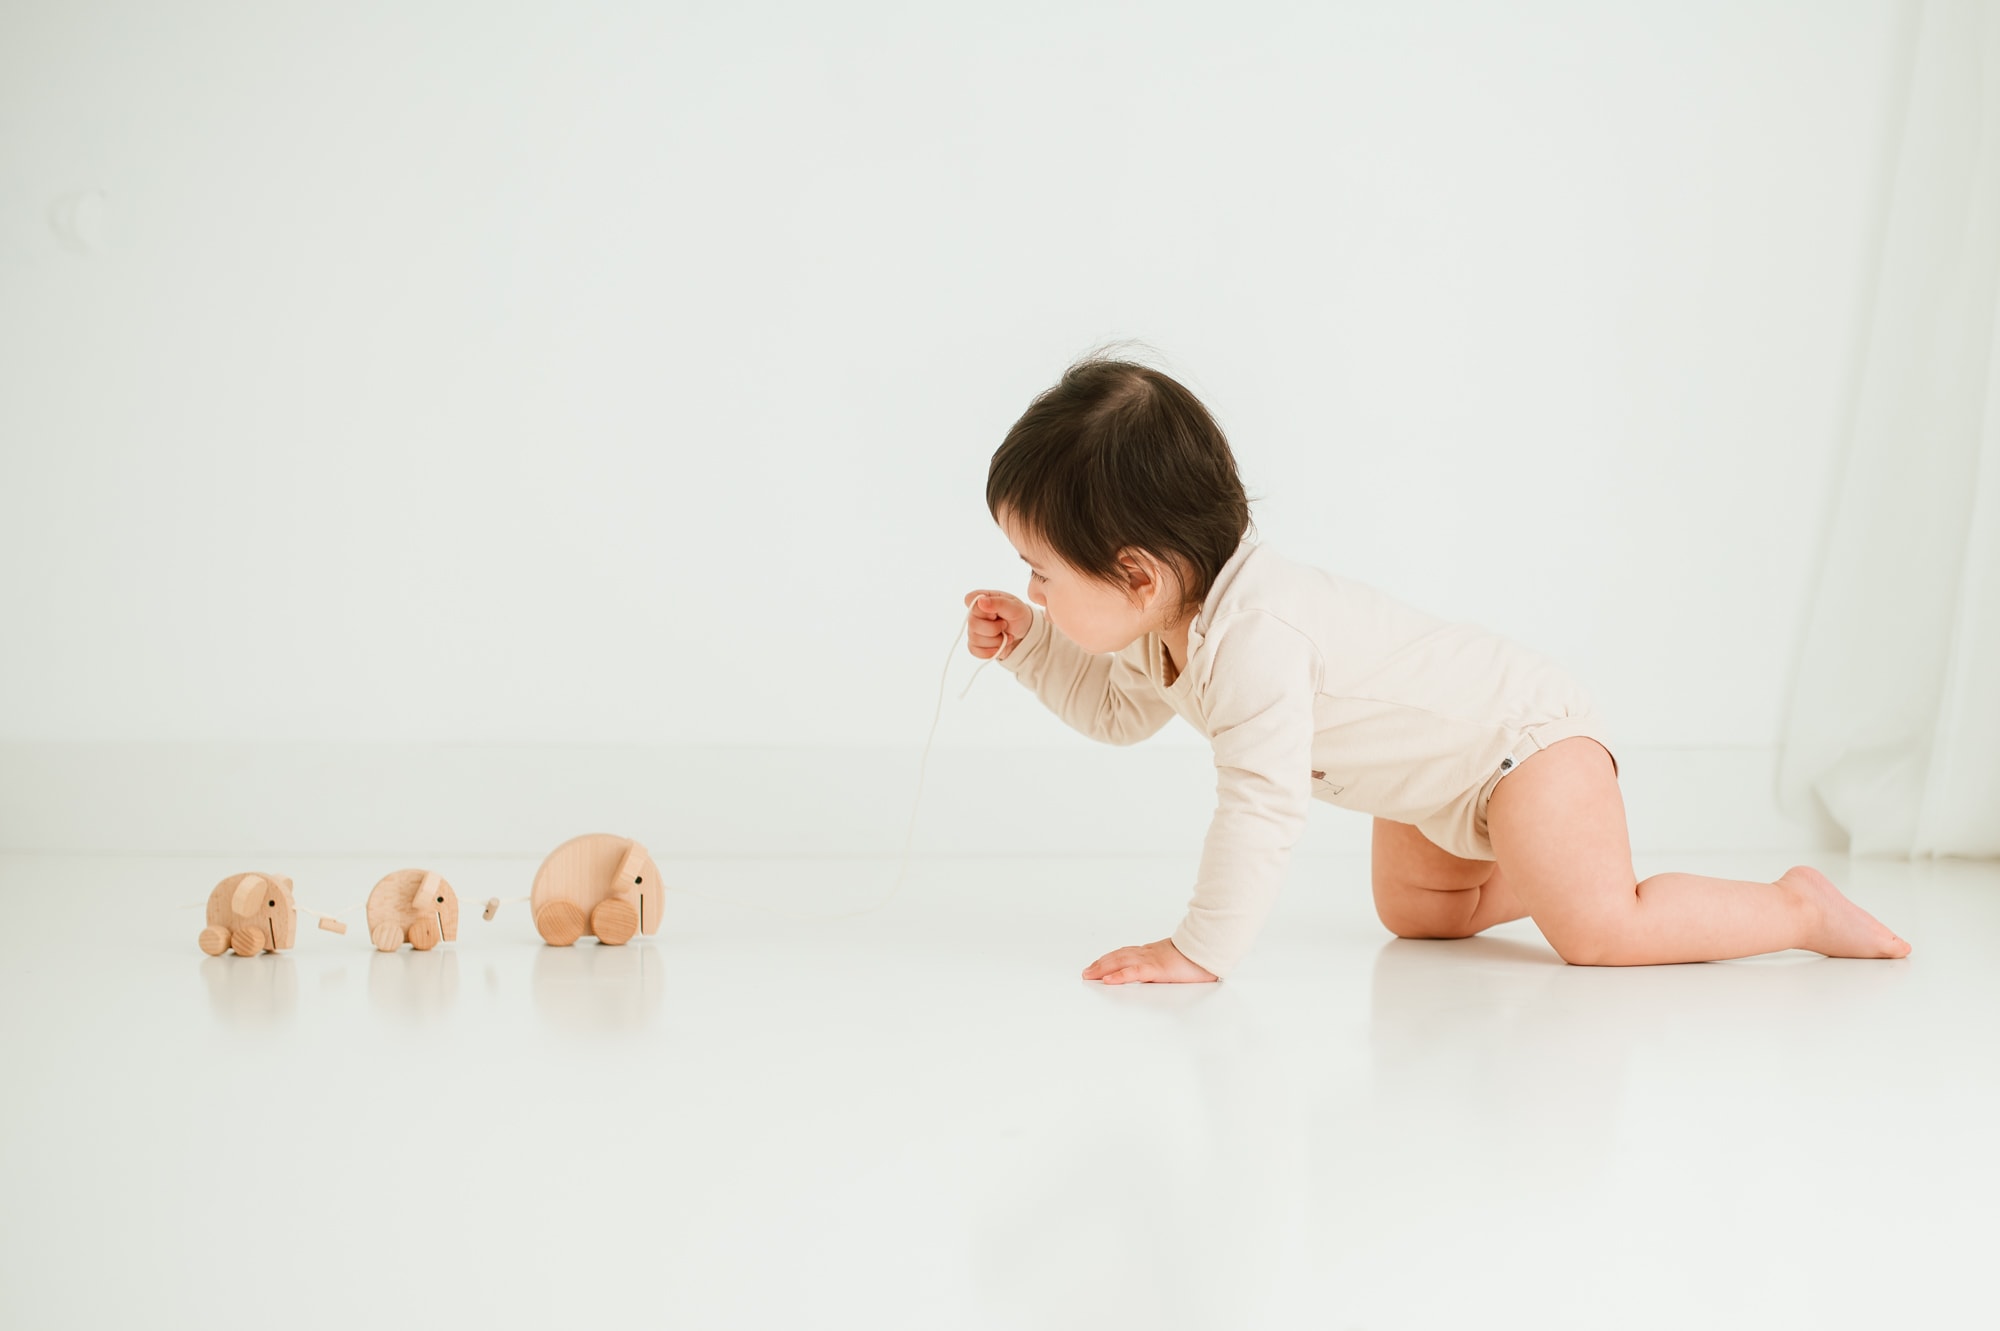 Minimalist portrait against a white background of toddler pulling a family of three wooden elephants on a string.